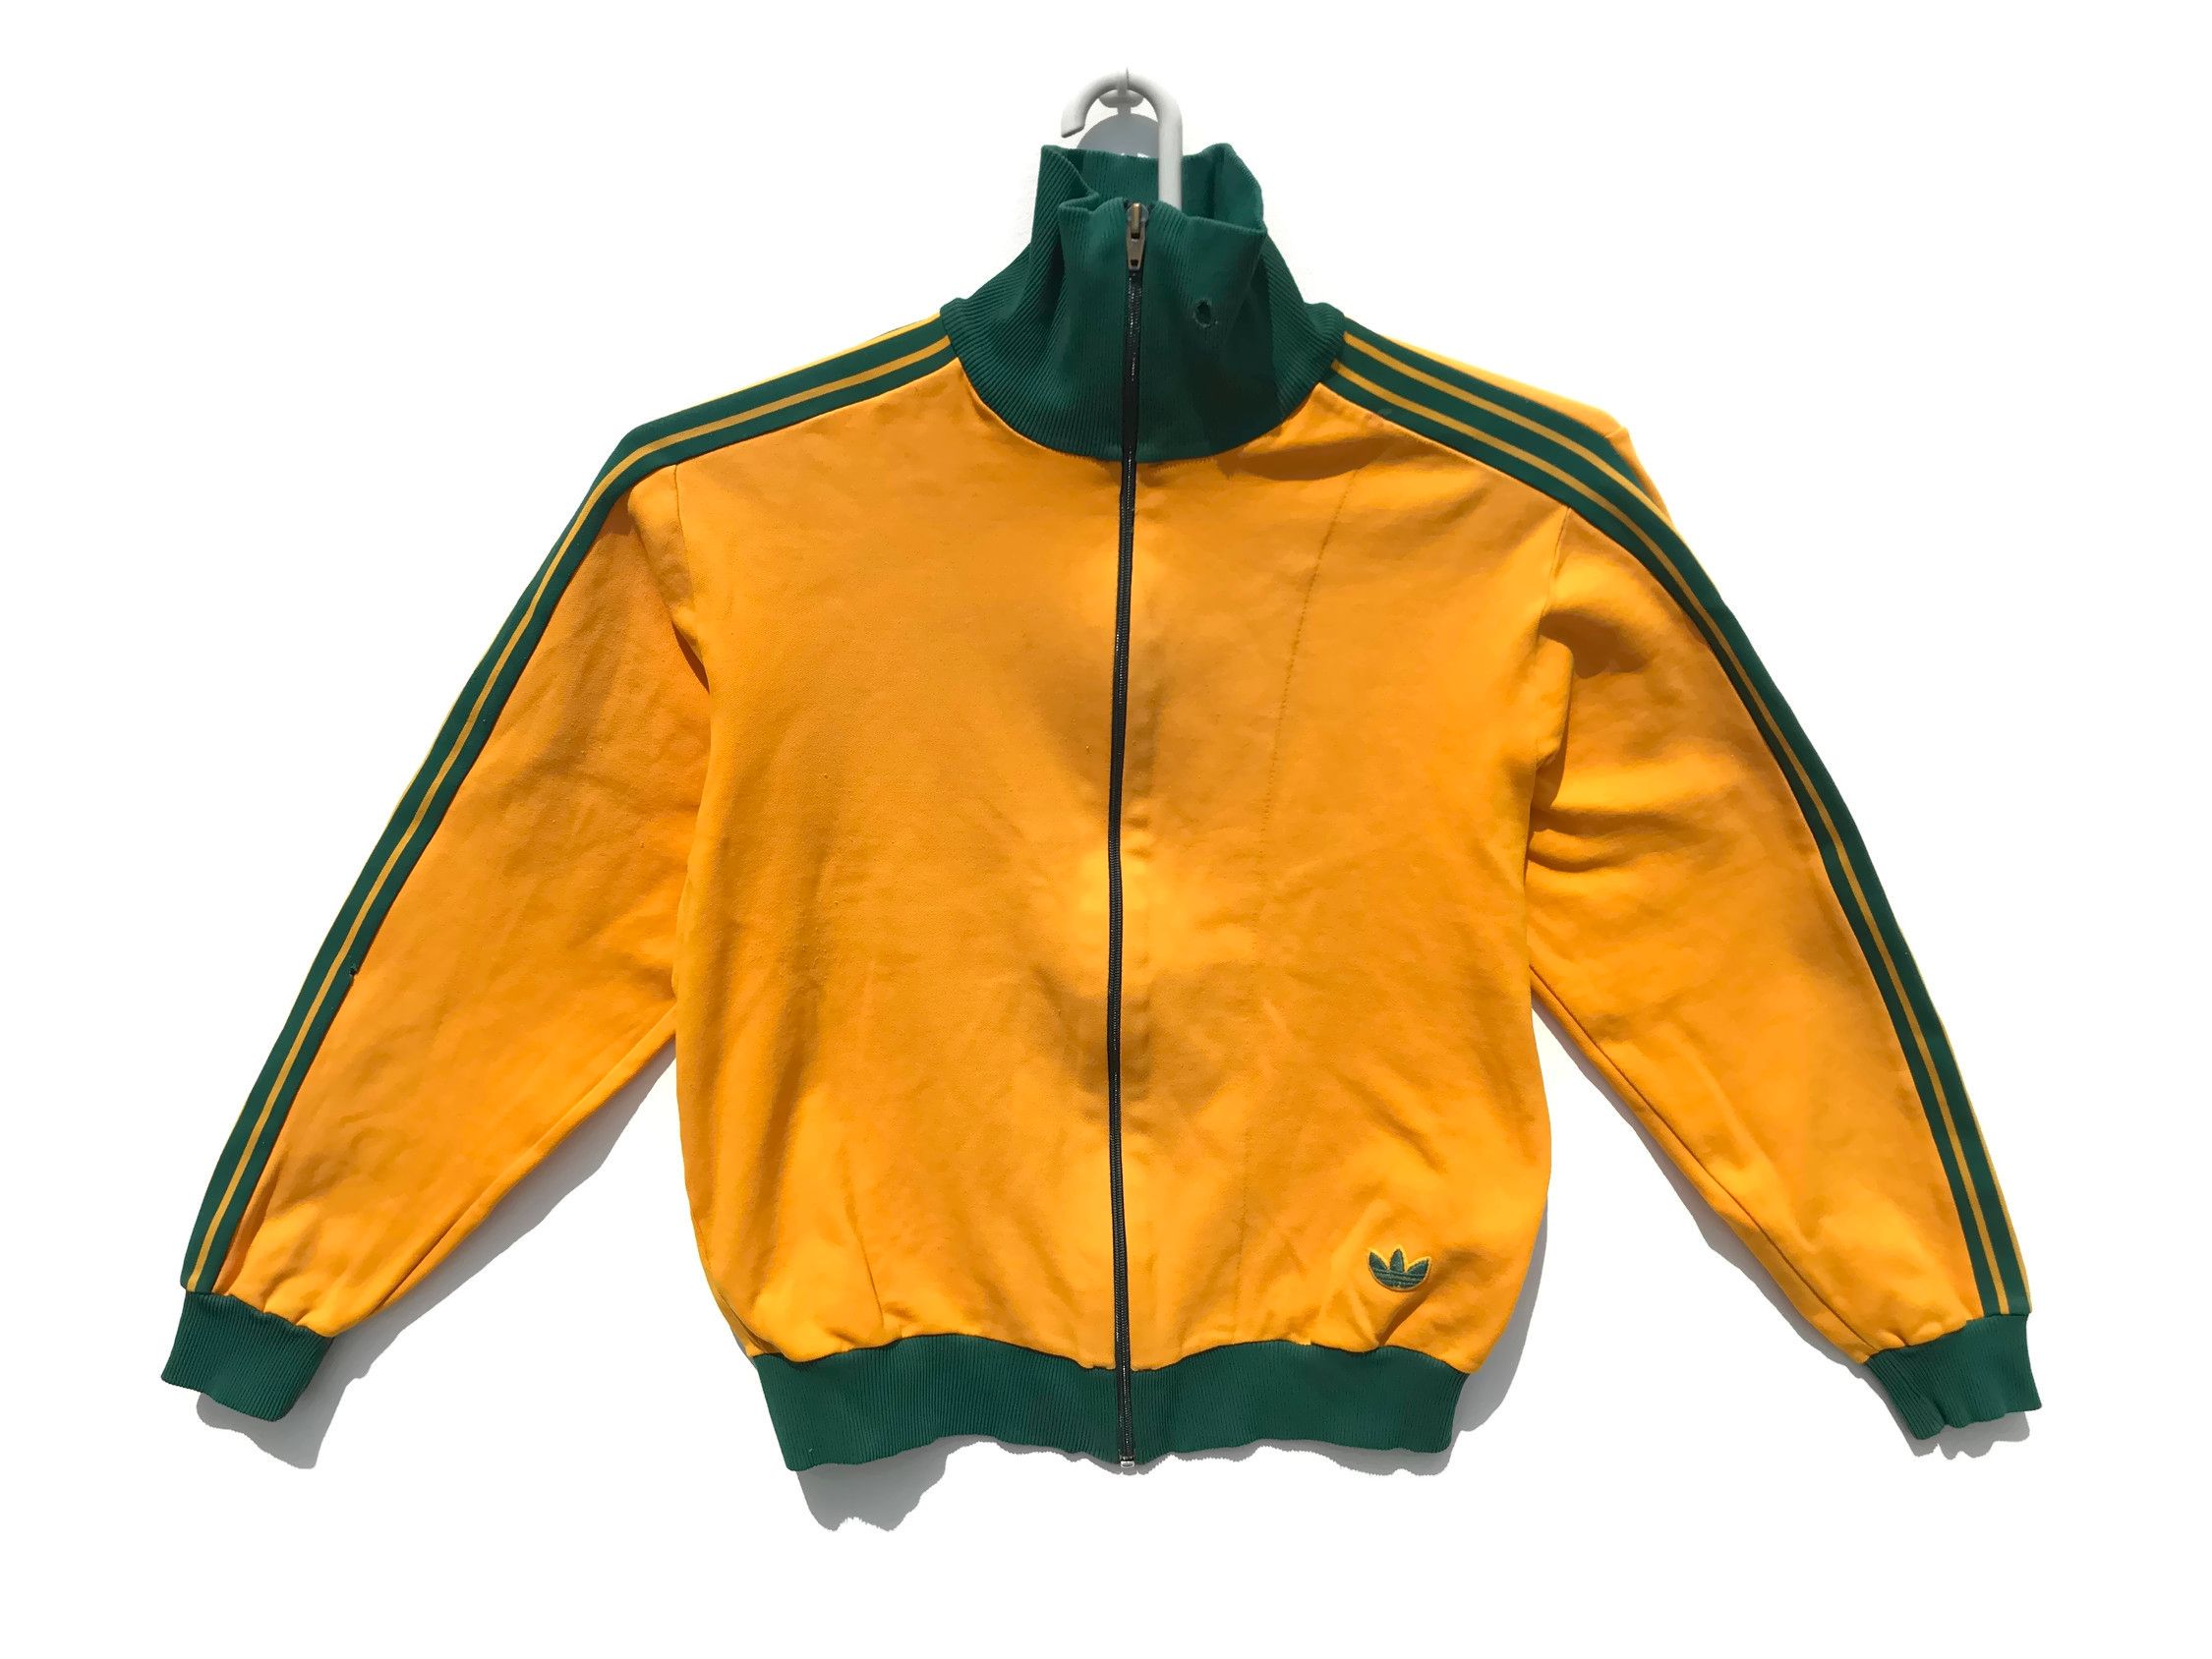 Adidas 70s 80s Adidas West Germany Track Jacket Size US M / EU 48-50 / 2 - 1 Preview